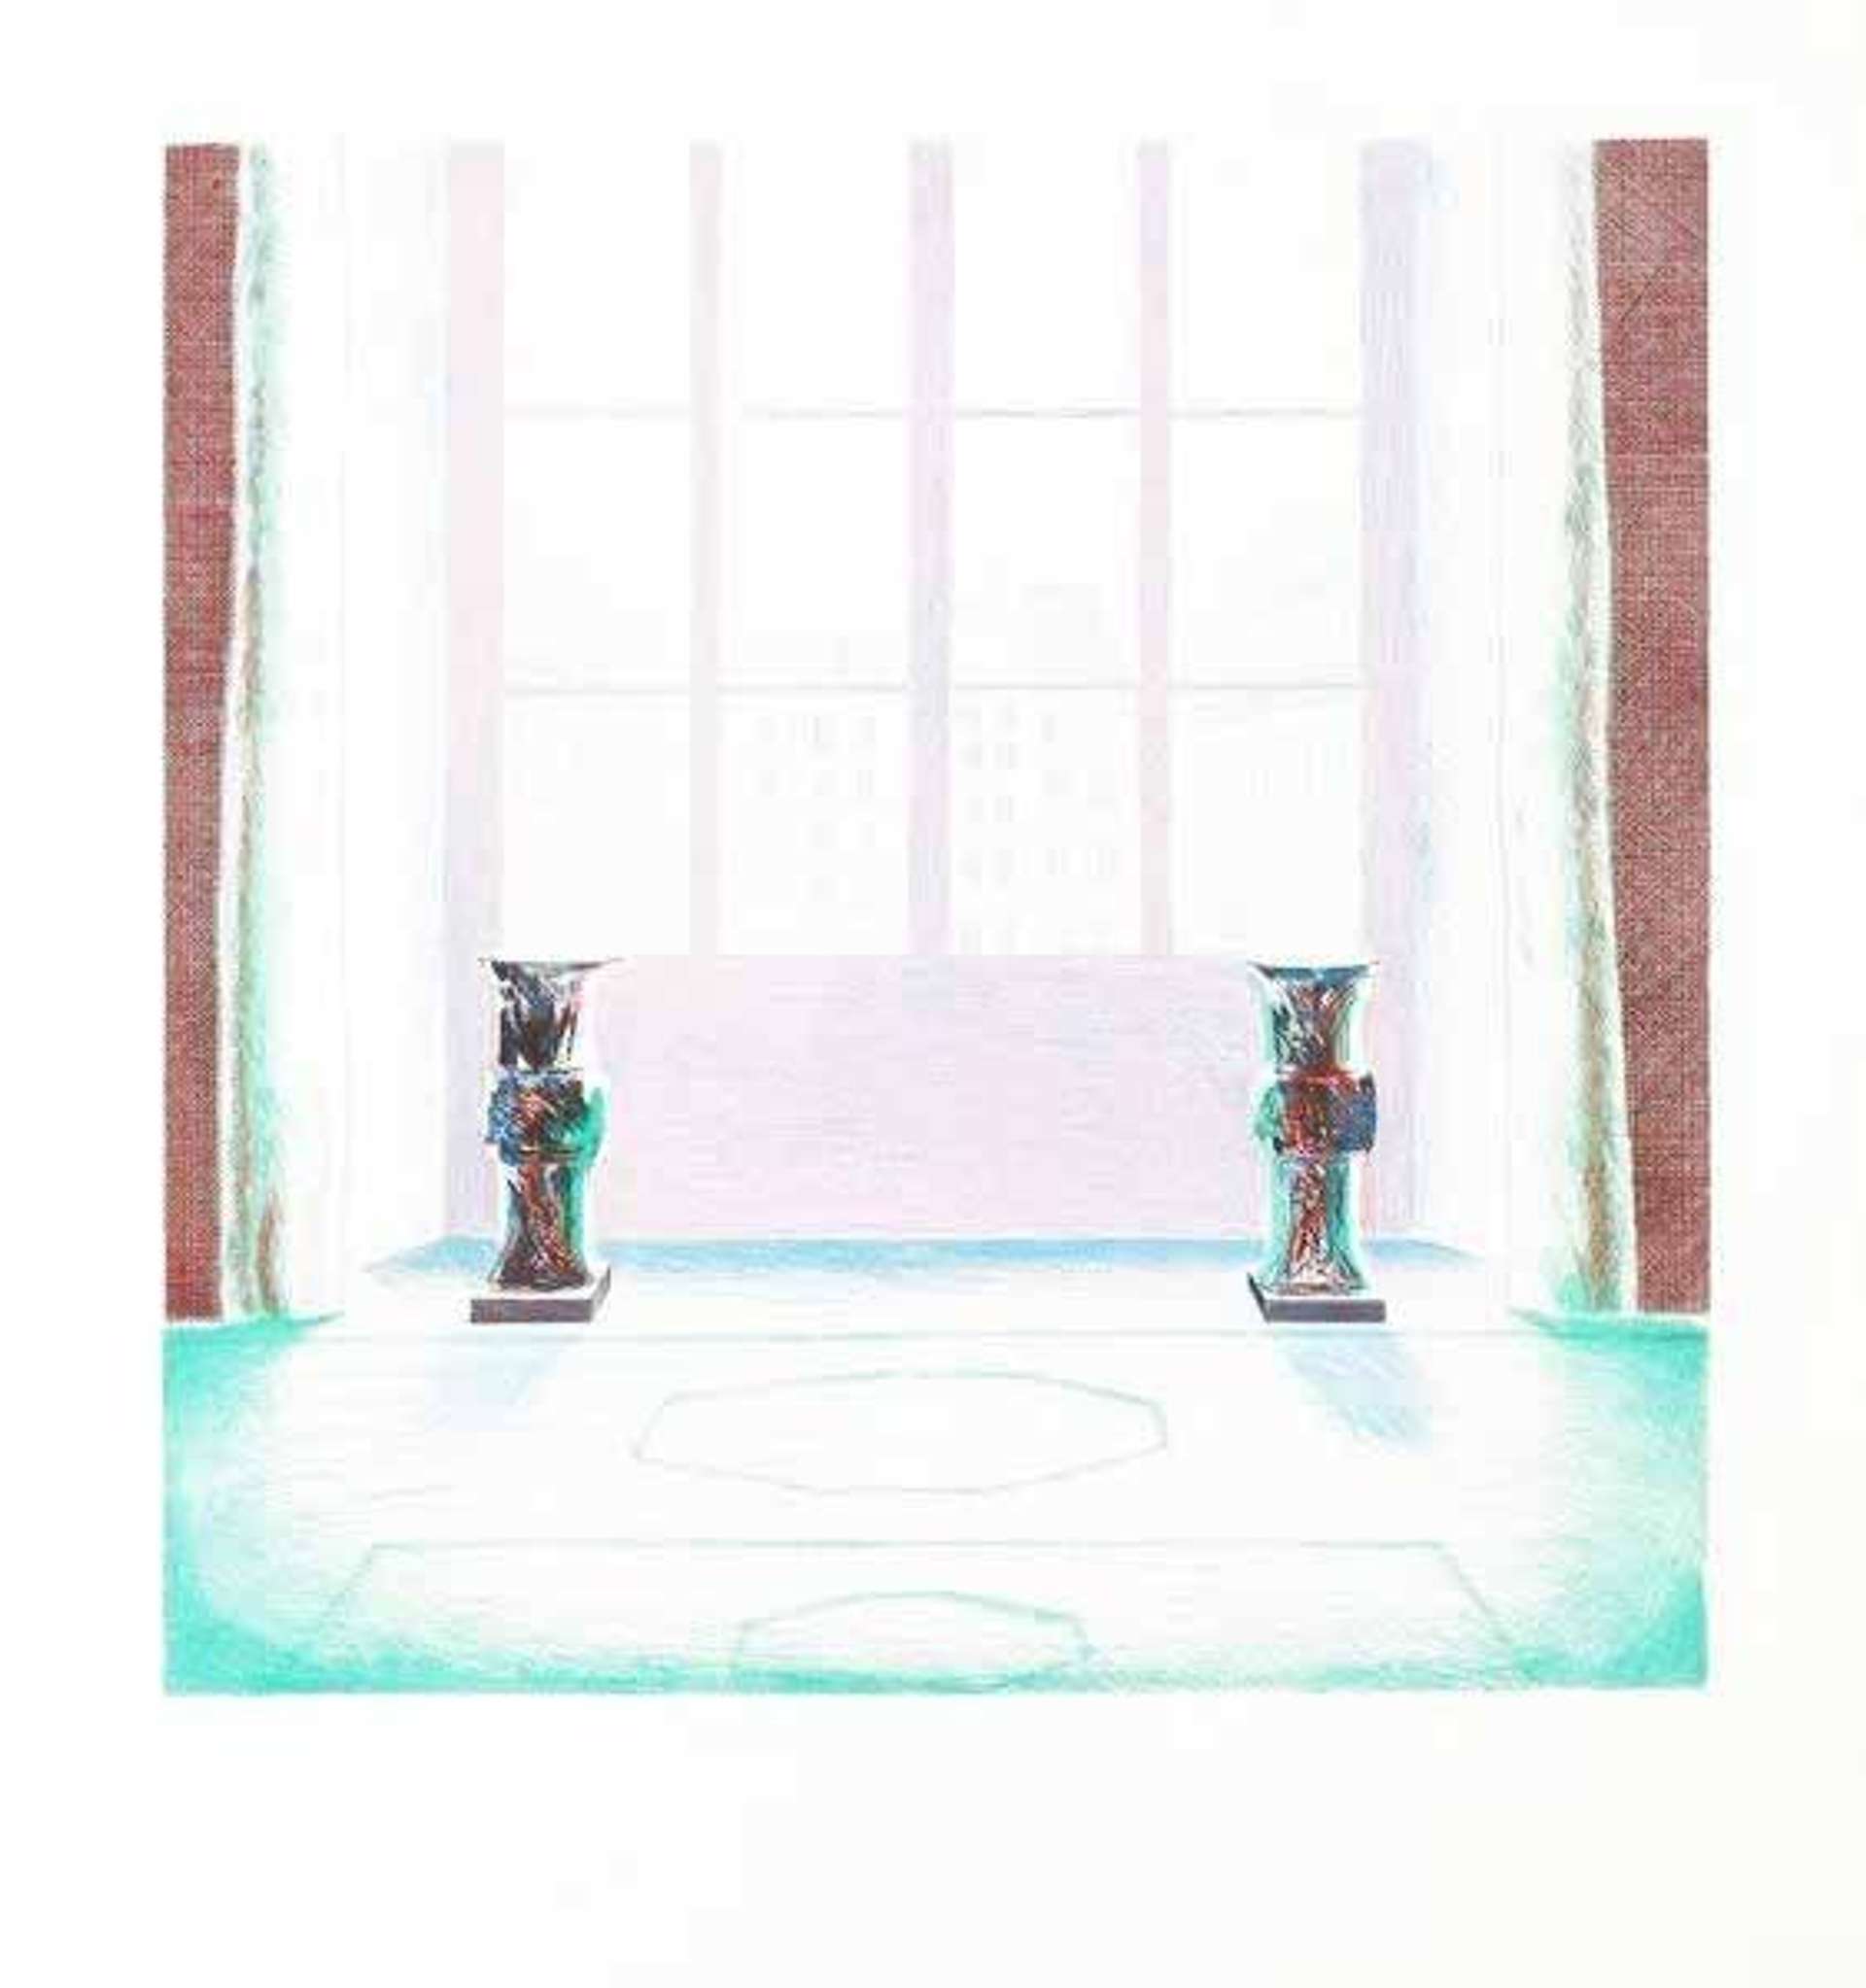 David Hockney: Two Vases In The Louvre - Signed Print